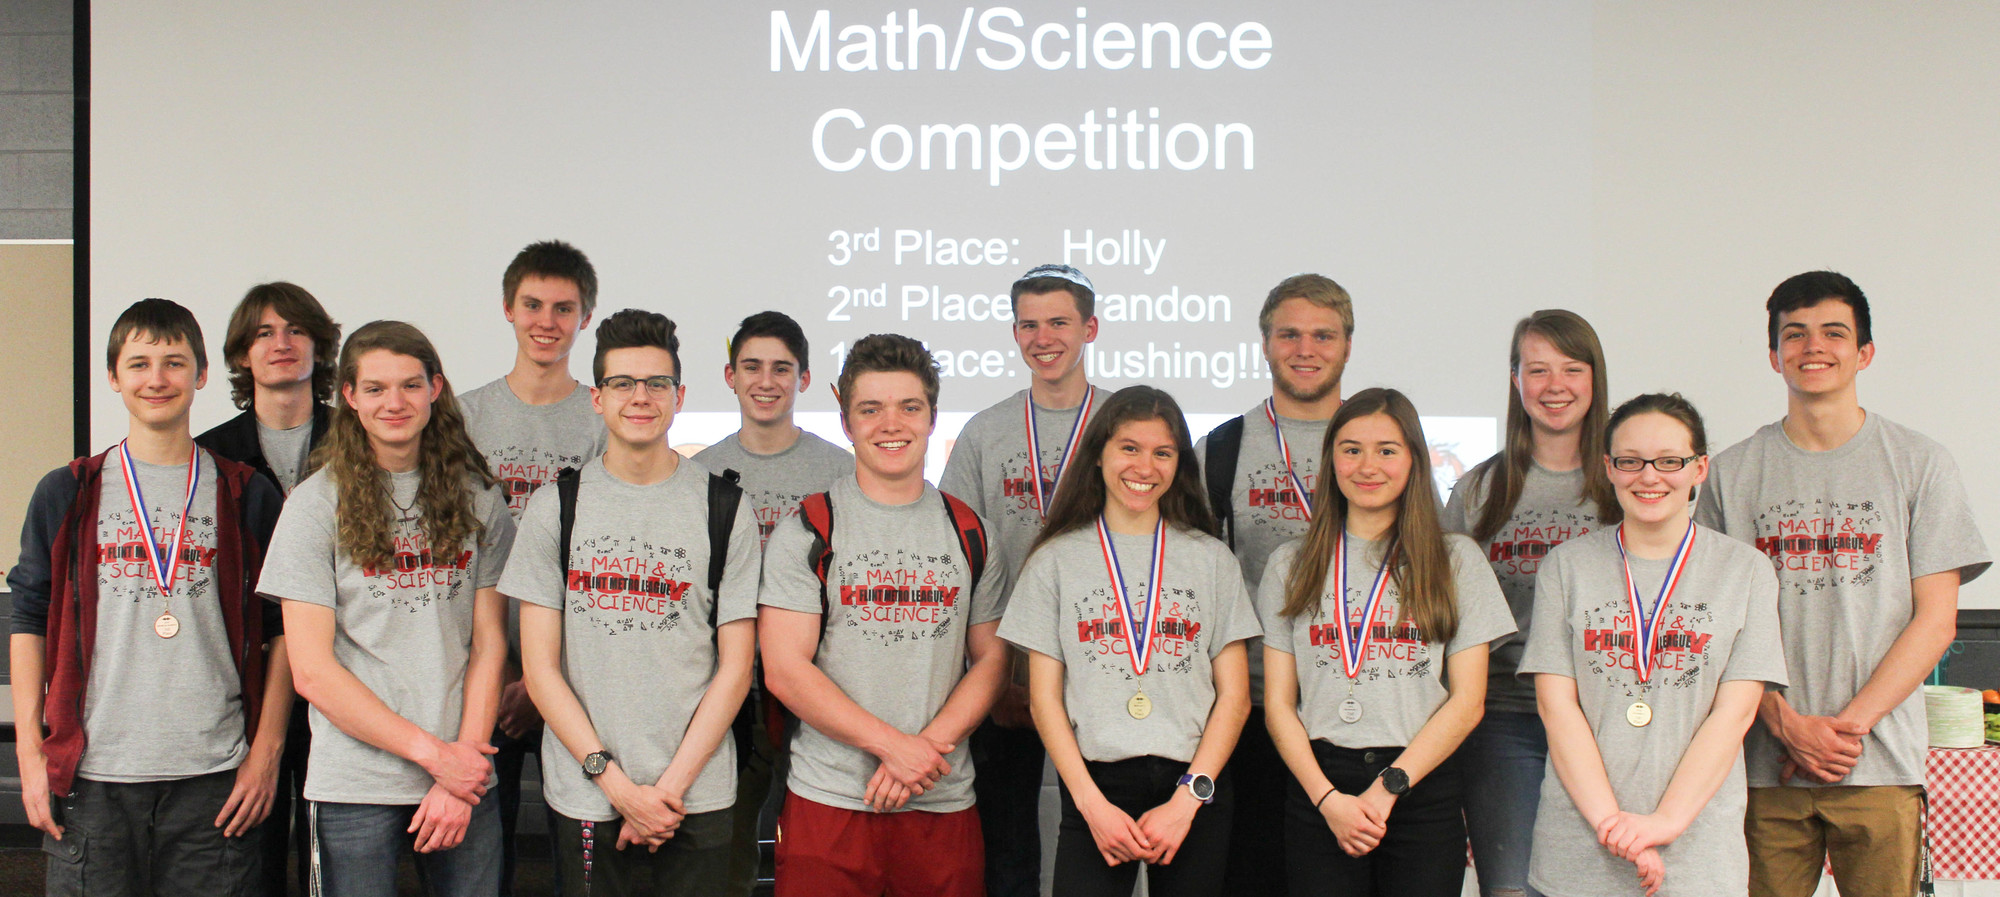 2018 Math/Science Competition team from Holly High School